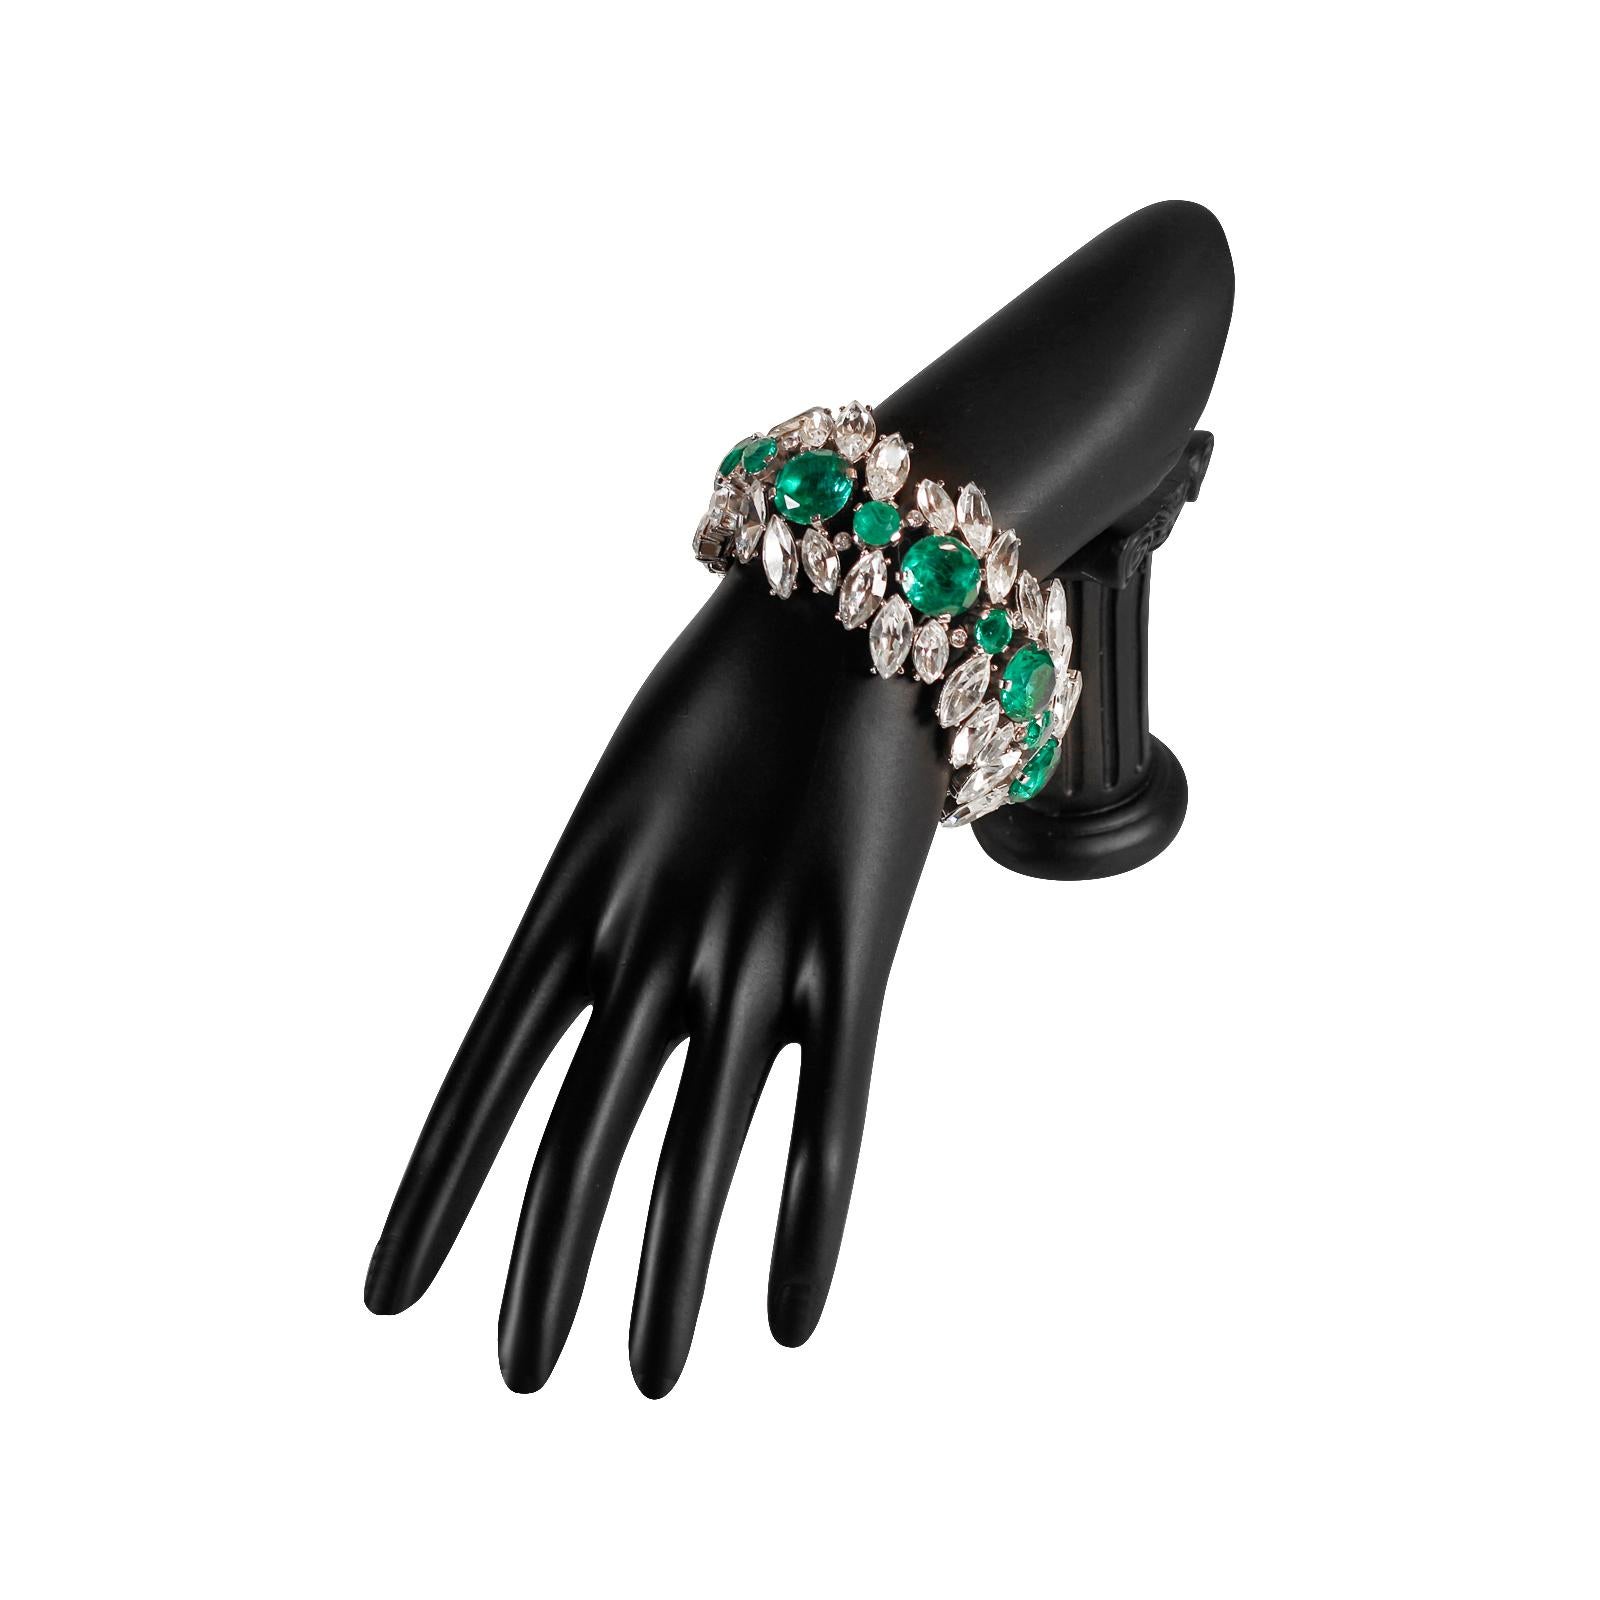 Vintage Trifari Emerald Green and Crystal Bracelet Circa 1960s For Sale 2